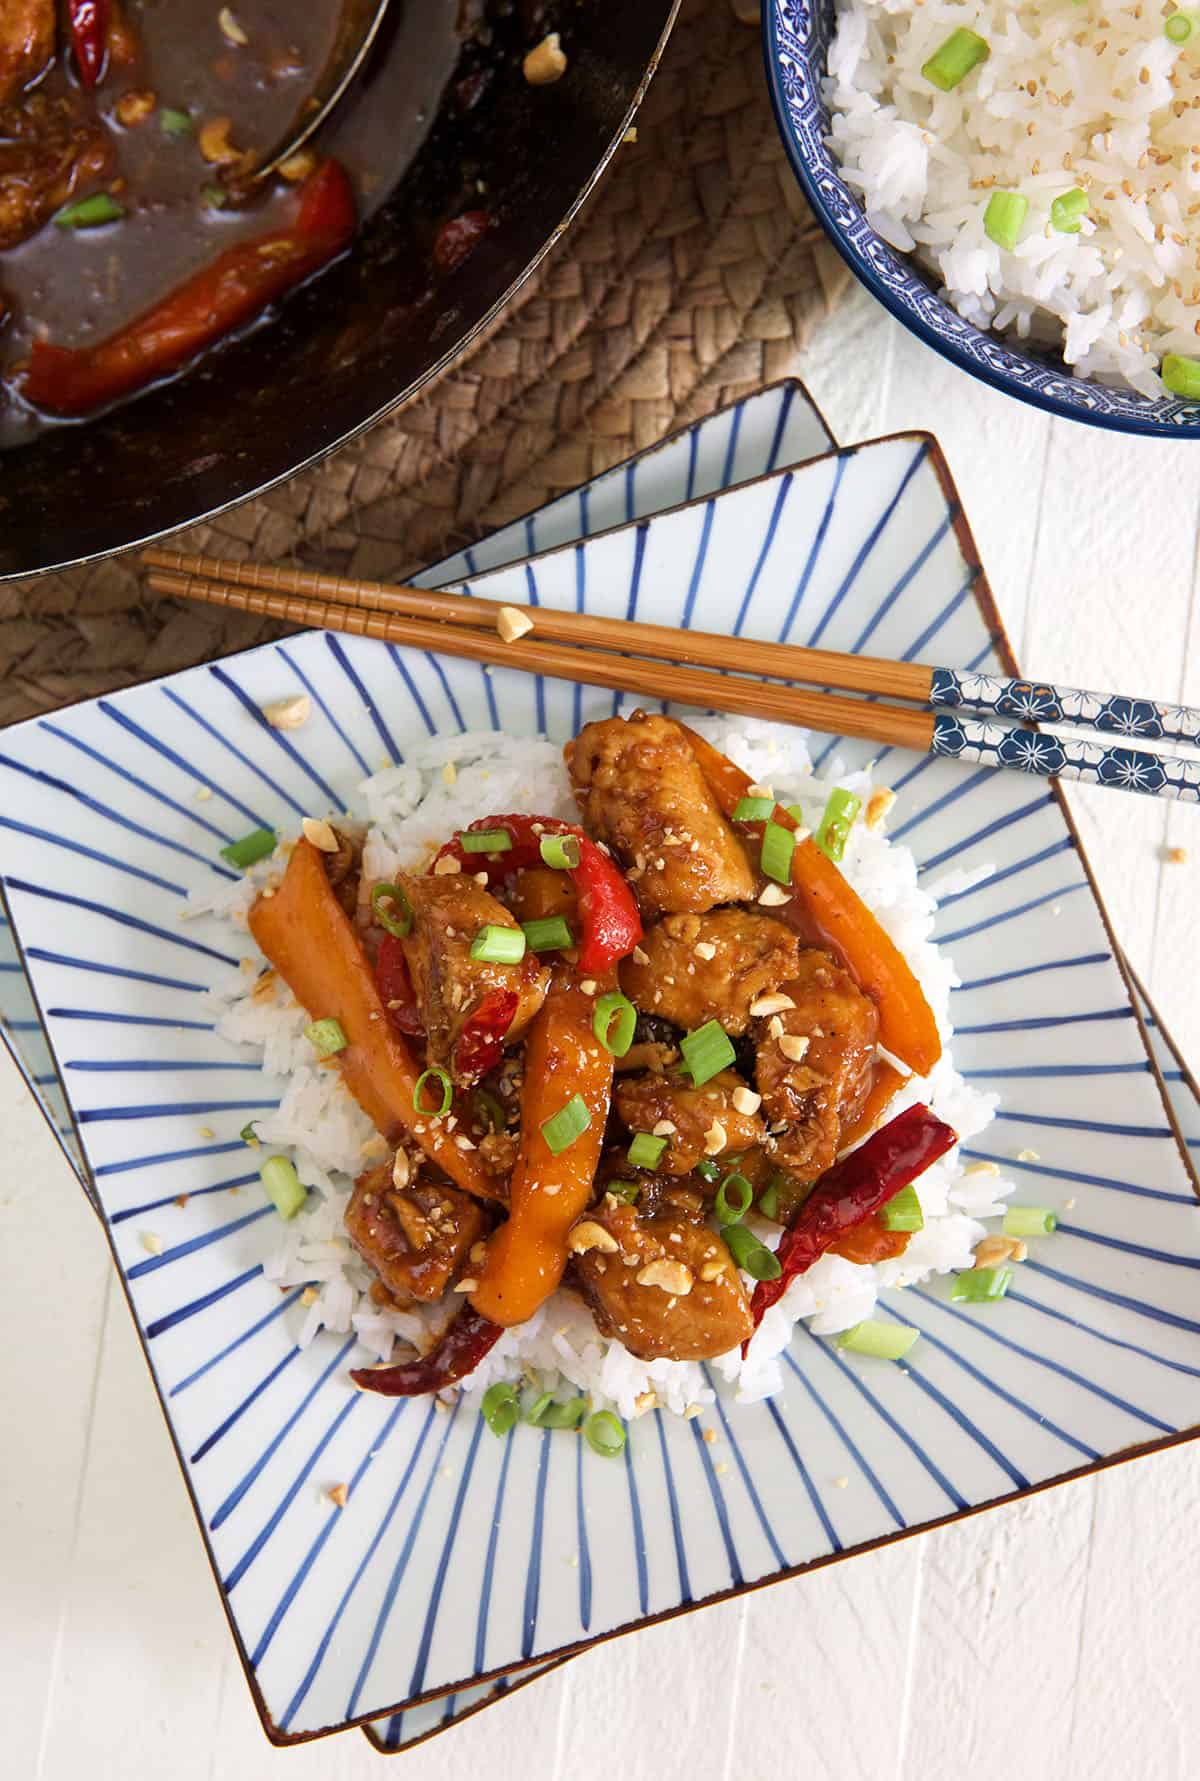 A serving of kung pao chicken is presented with white rice on a striped plate.